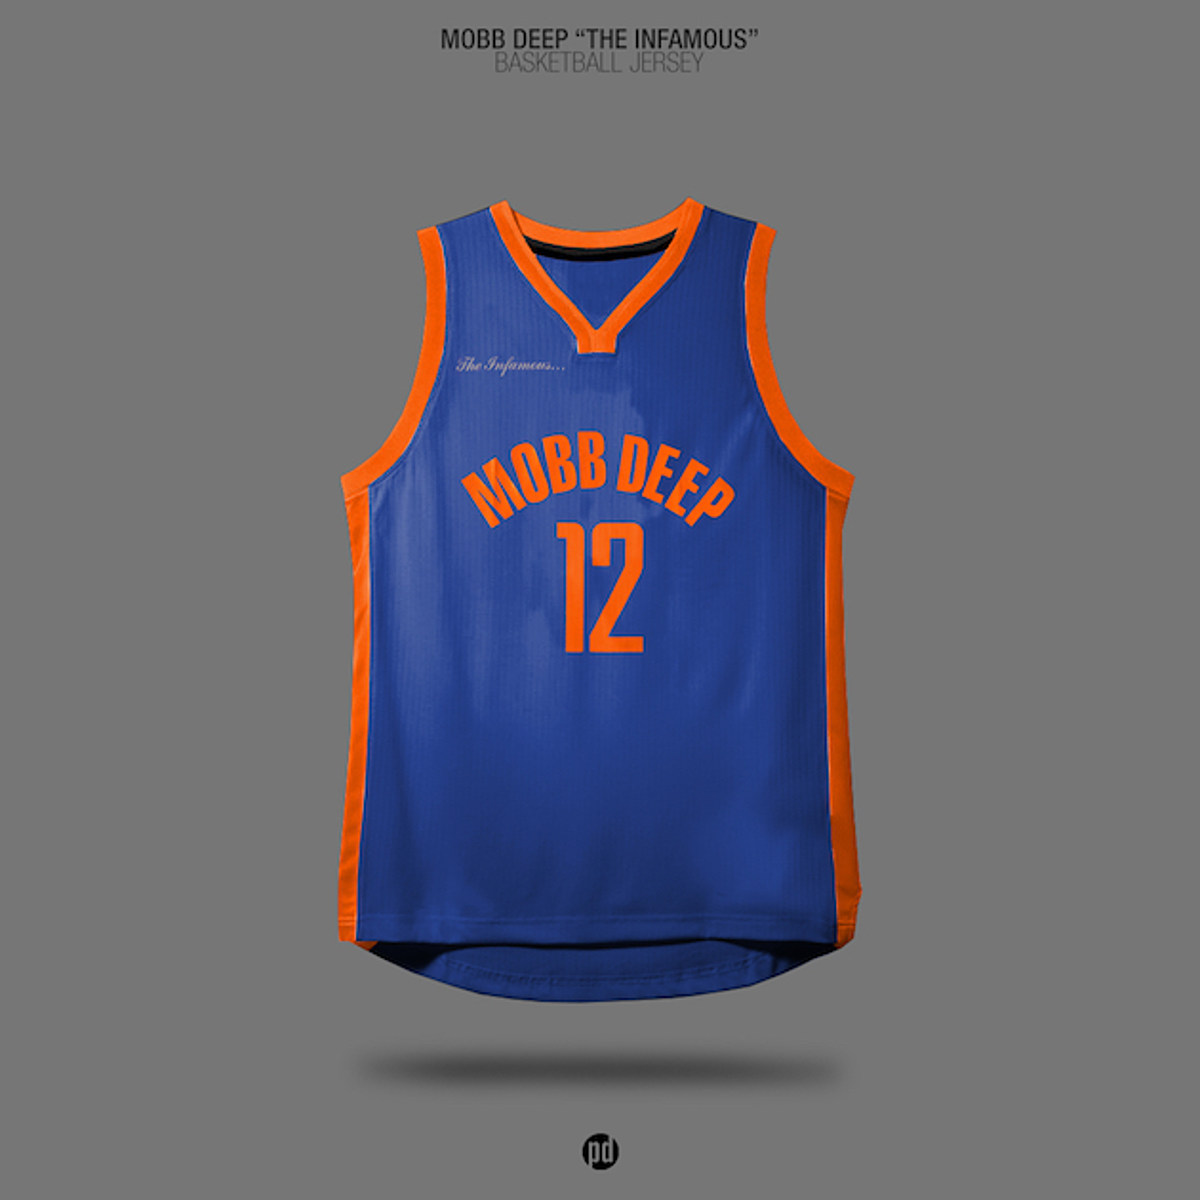 An Artist Created Jerseys Inspired by Classic Rap Albums - XXL